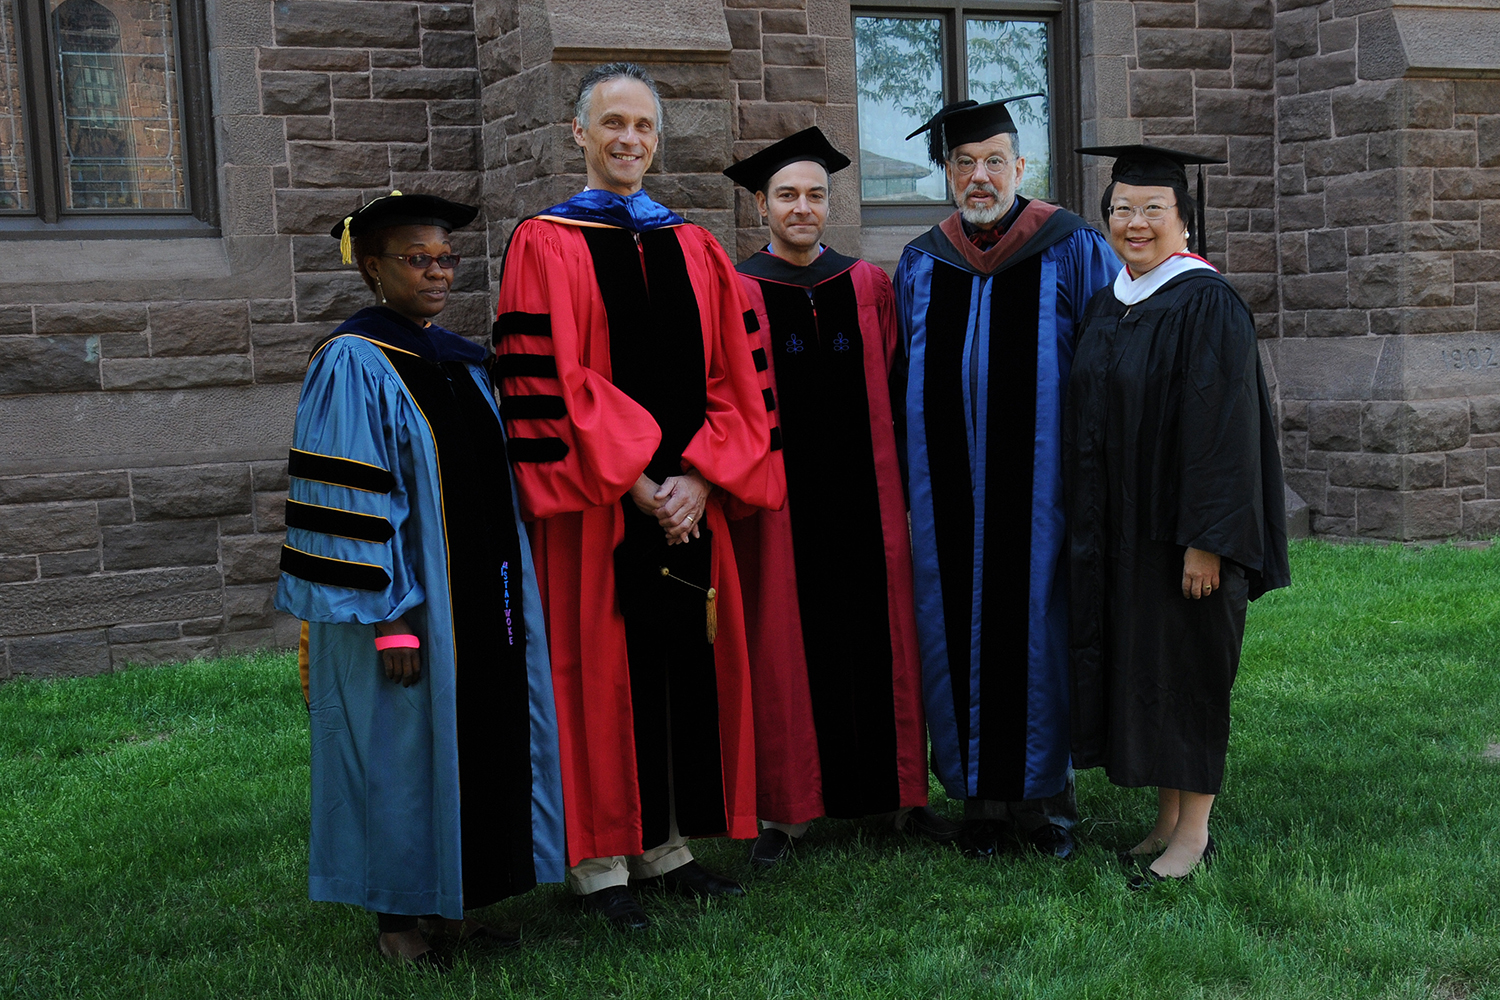 Wesleyan President Michael Roth (second of left) and Daphne Kwok '84, chair of the Wesleyan Alumni Association 9fifth from left) presented The Binswanger Prize for Excellence in Teaching to Gina Athena Ulysse (at left), Michael Calter and David Schorr. (Photo by John Van Vlack)